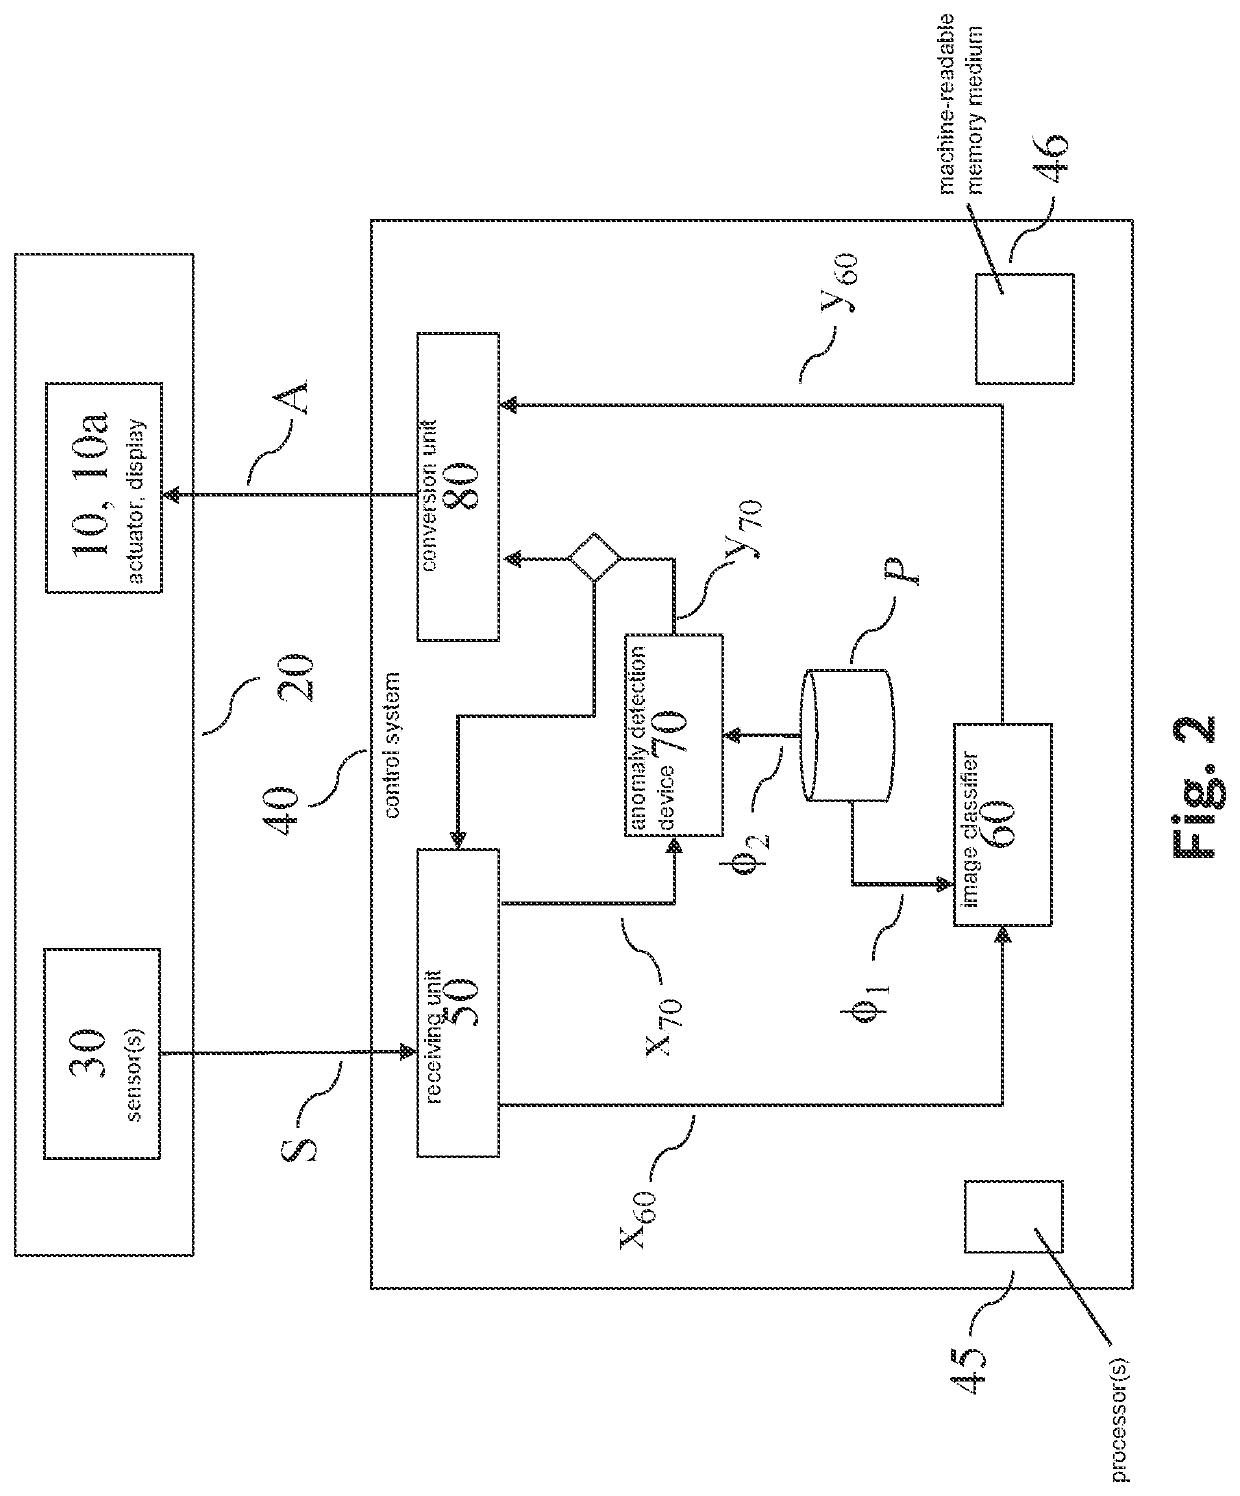 Method and device for detecting anomalies in sensor recordings of a technical system